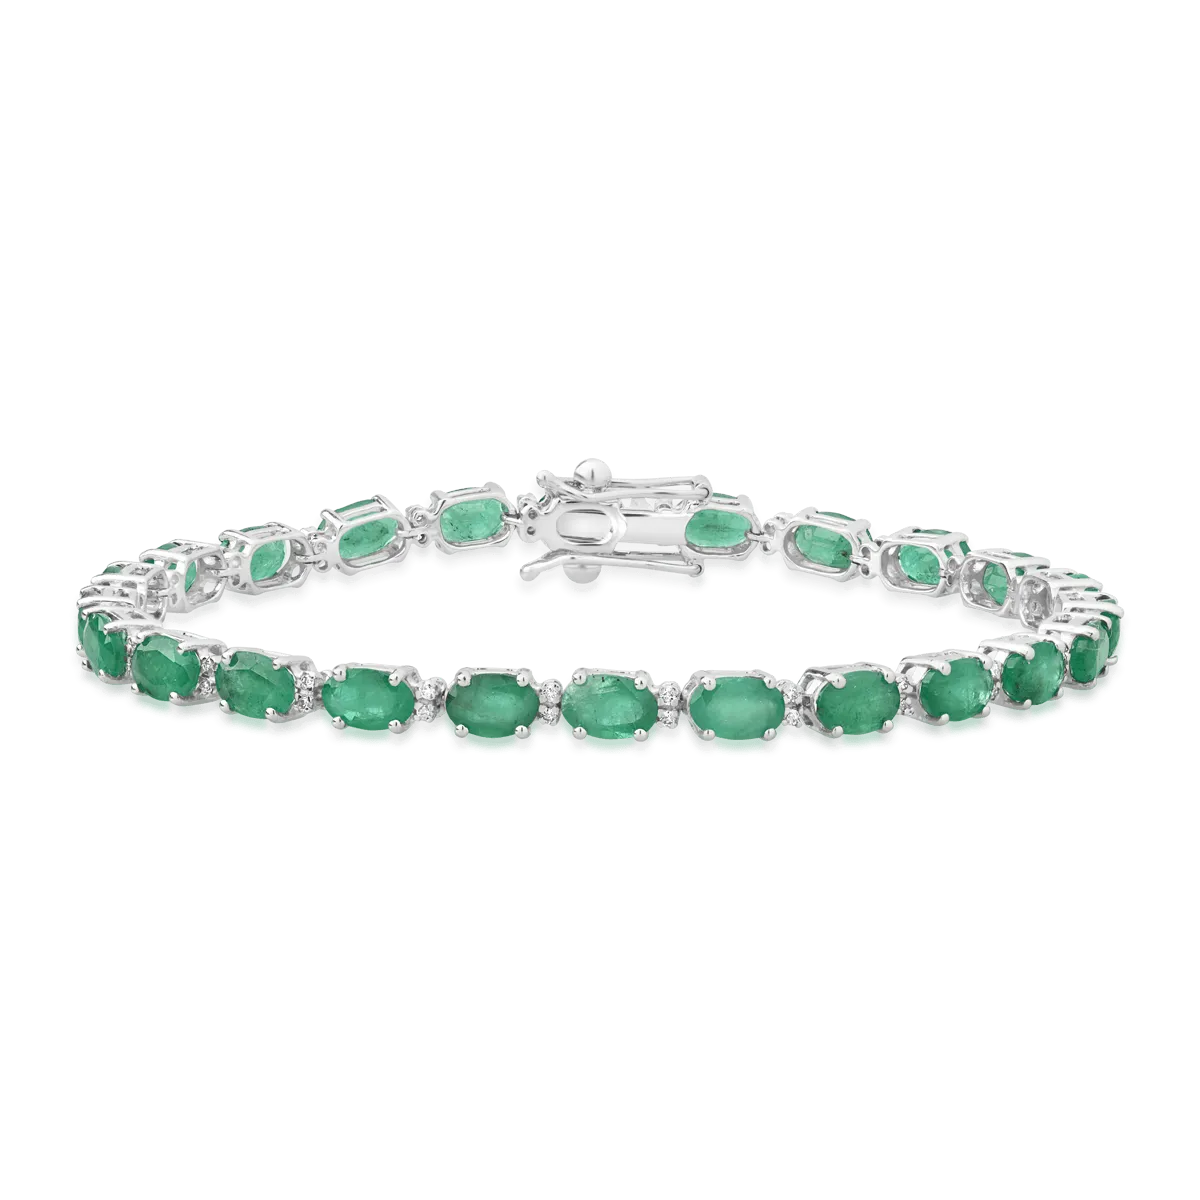 14K white gold tennis bracelet with 9.94ct emeralds and 0.223ct diamonds